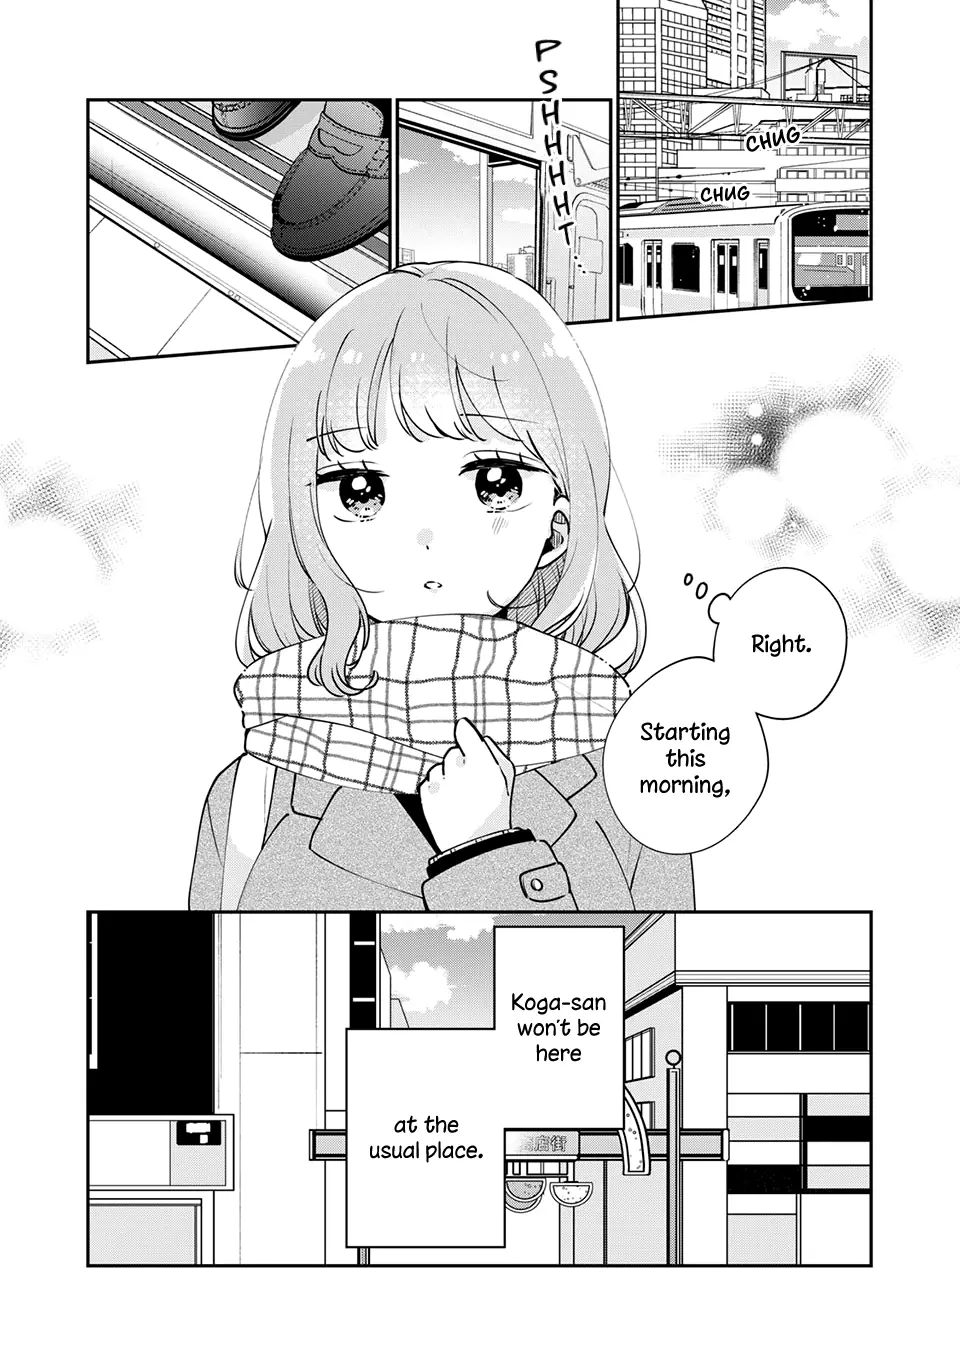 It's Not Meguro-San's First Time - 40 page 2